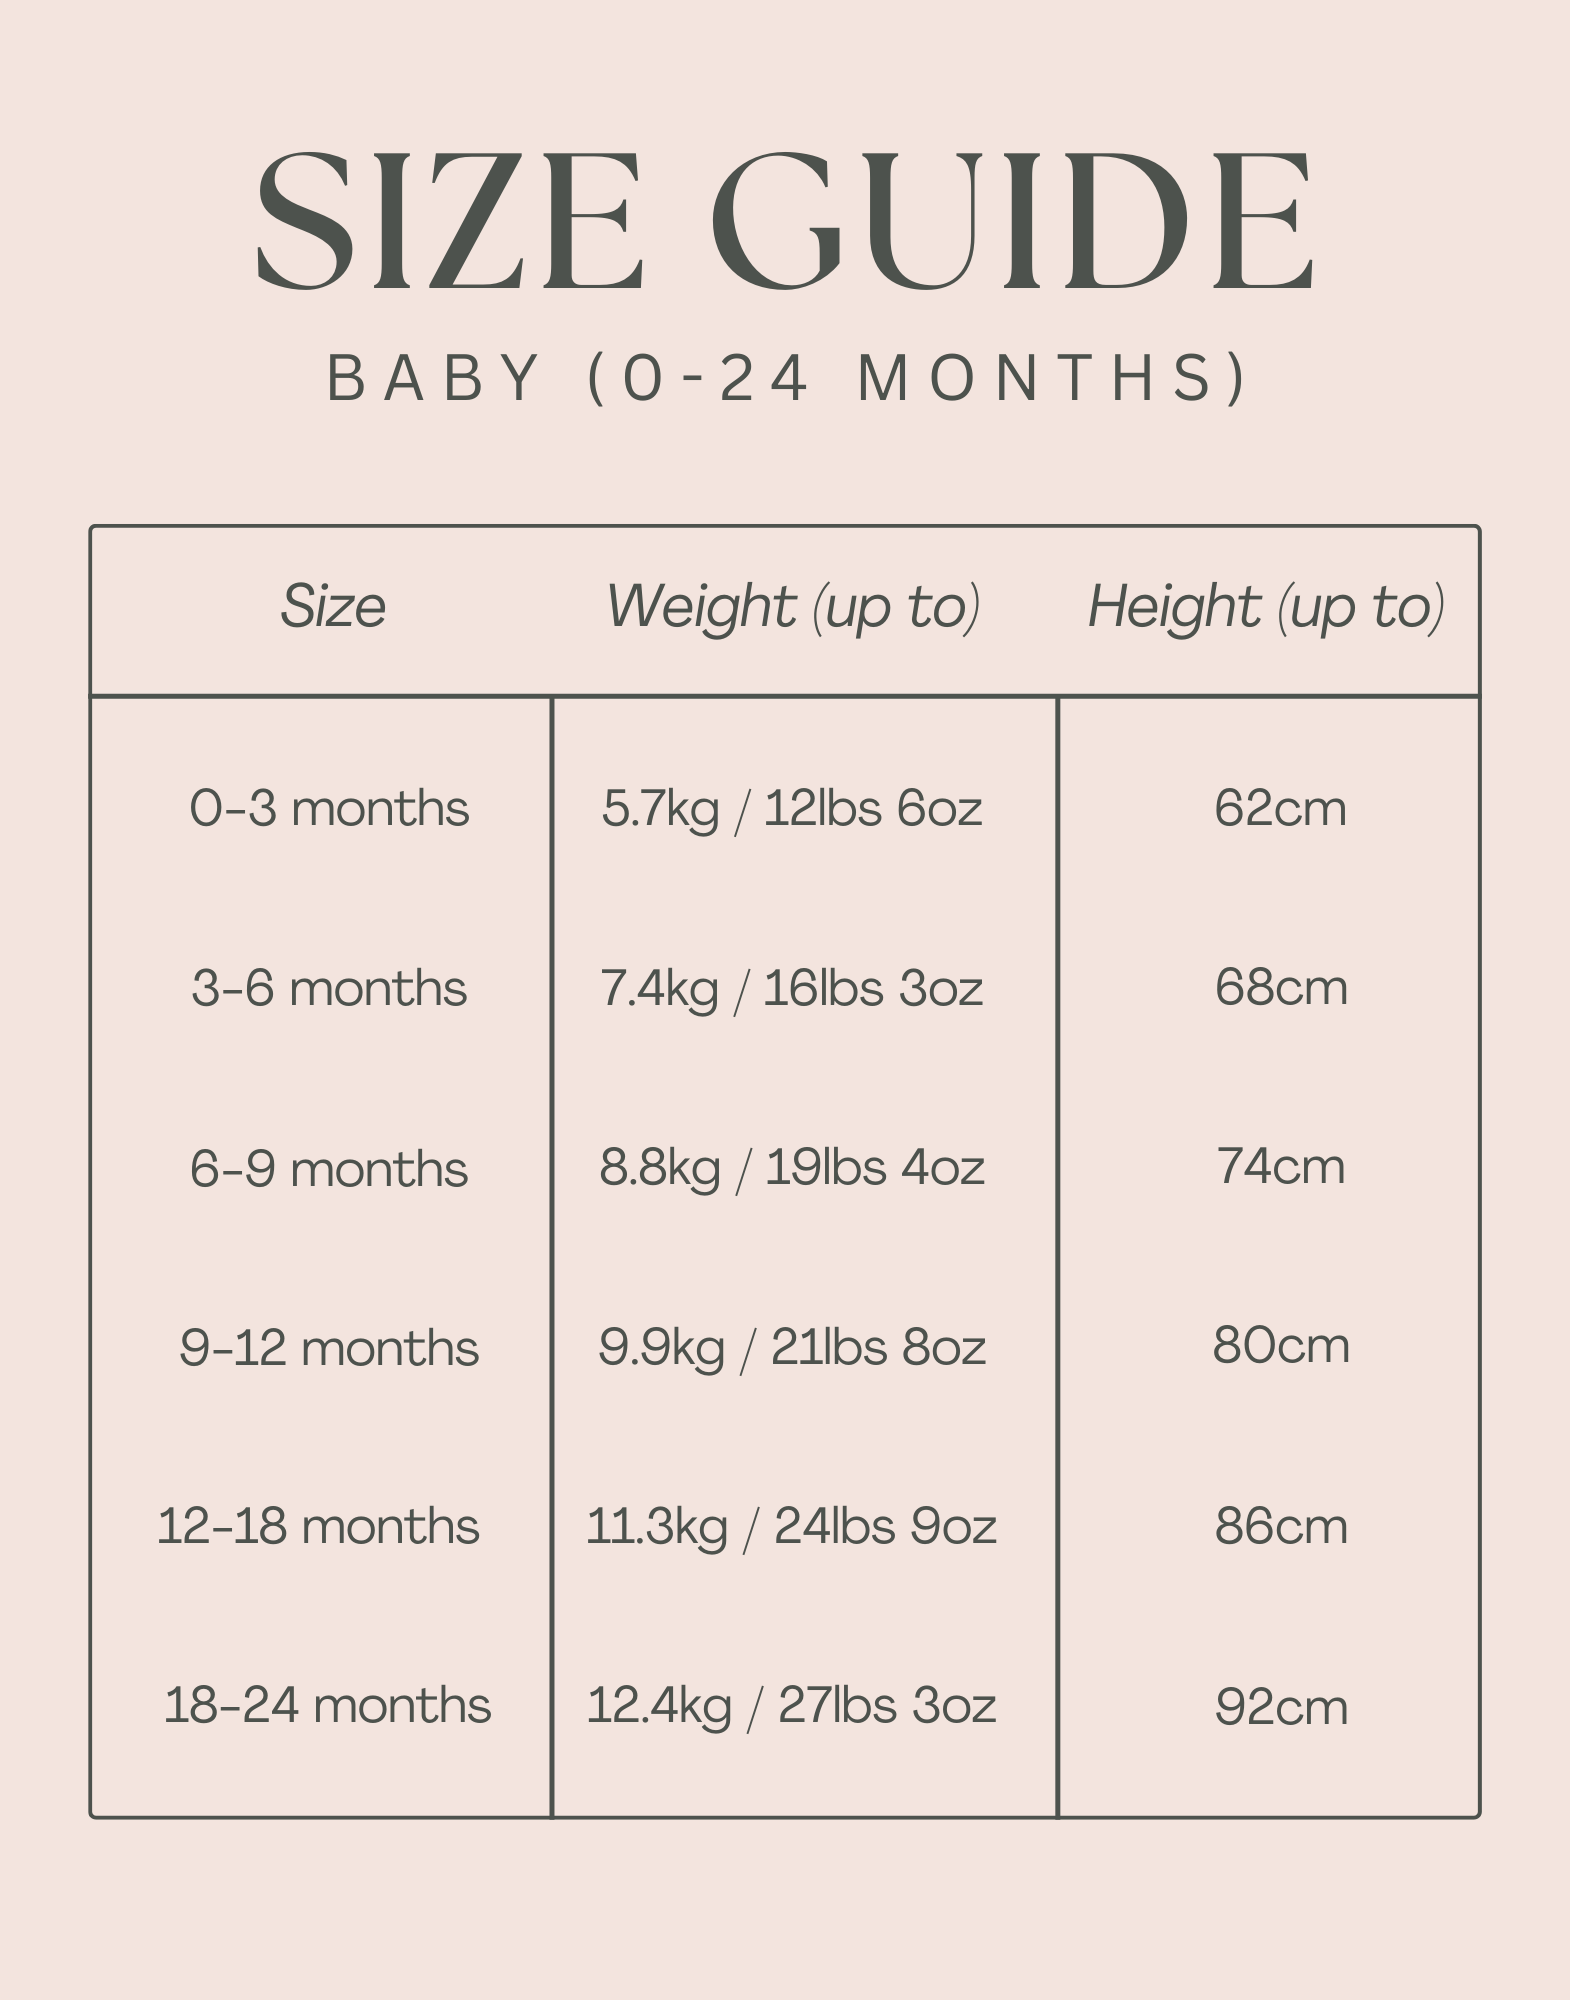 Aneby size guide 6 months to 24 months